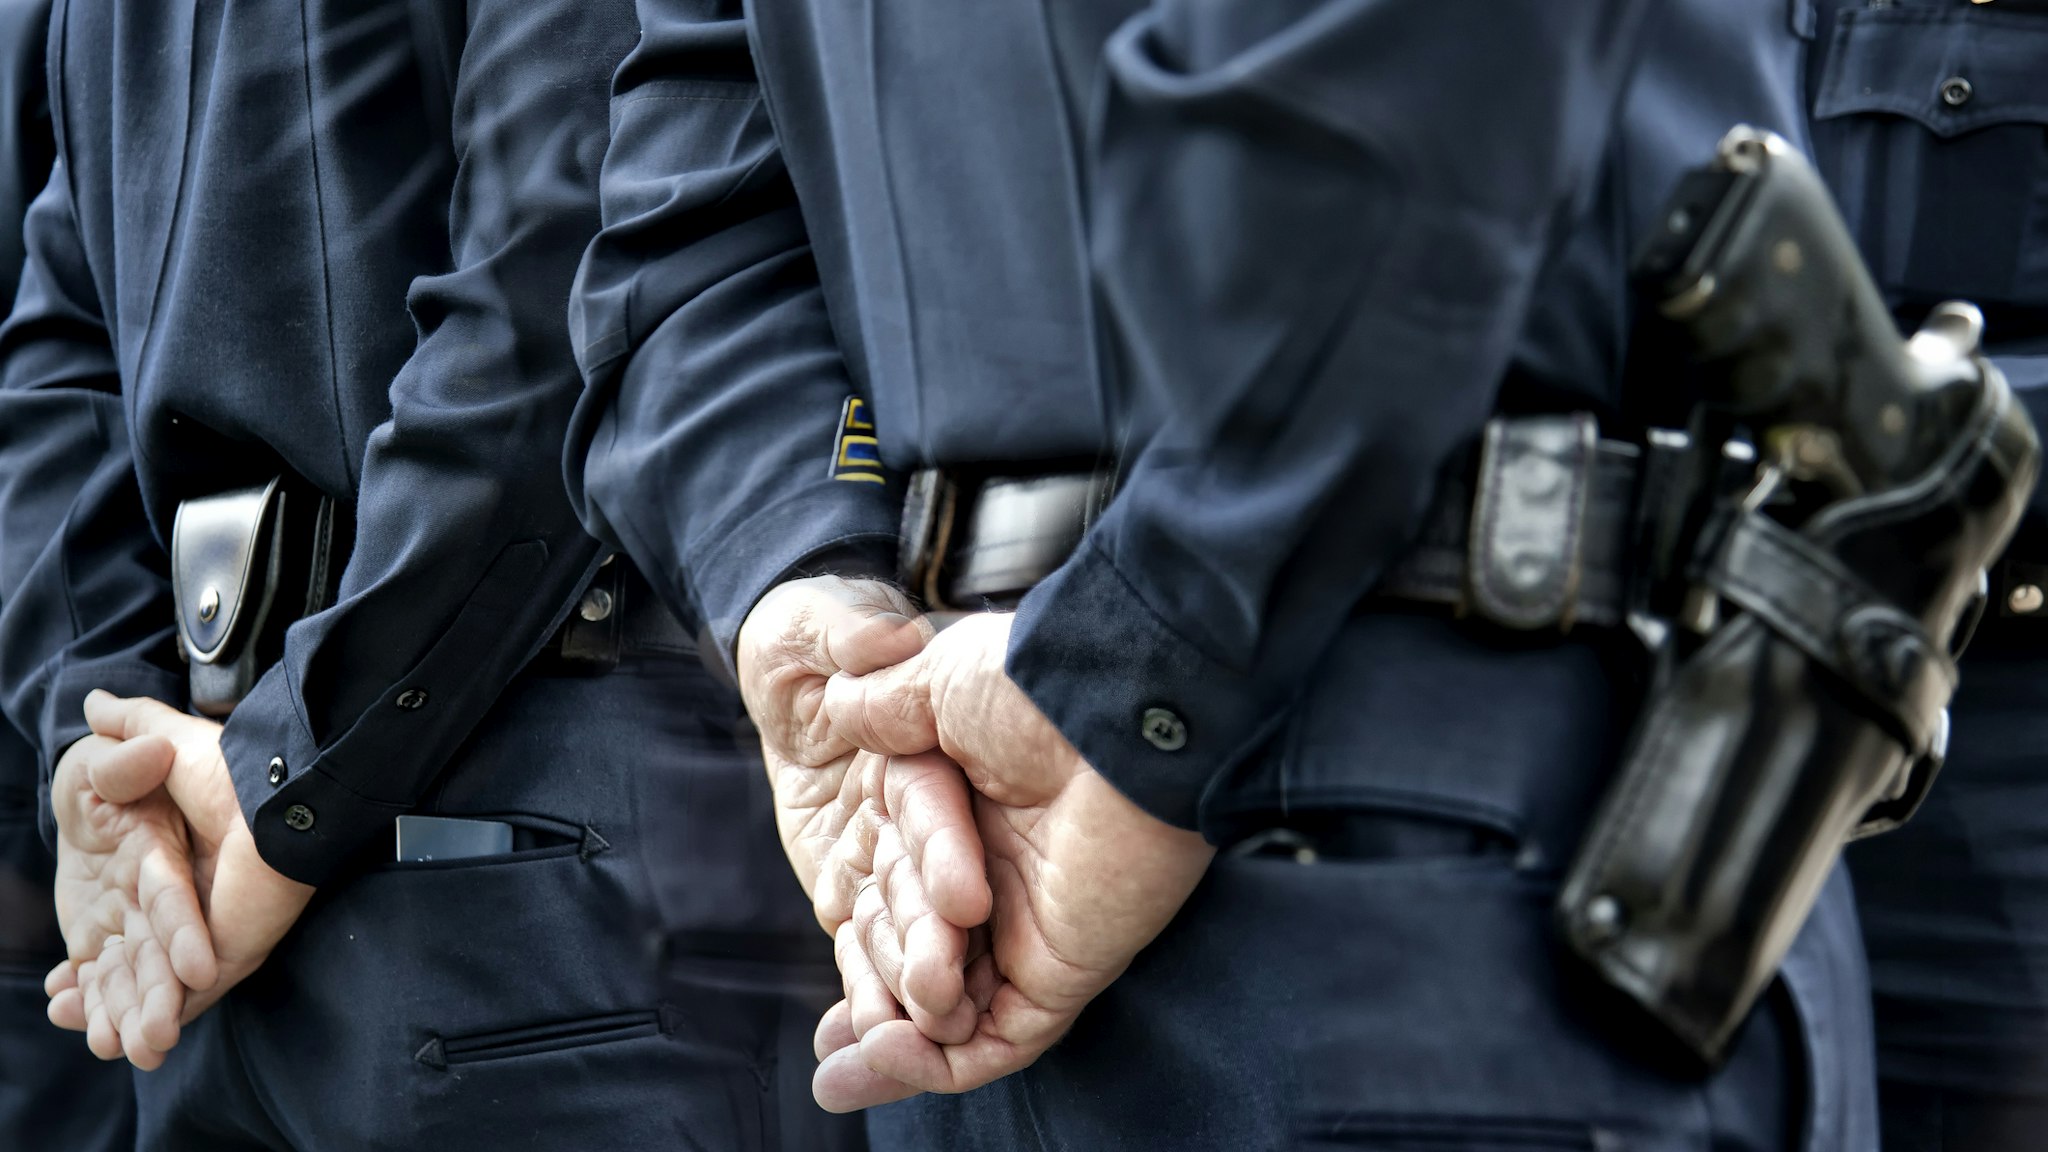 Officers standing with hands behind - stock photo